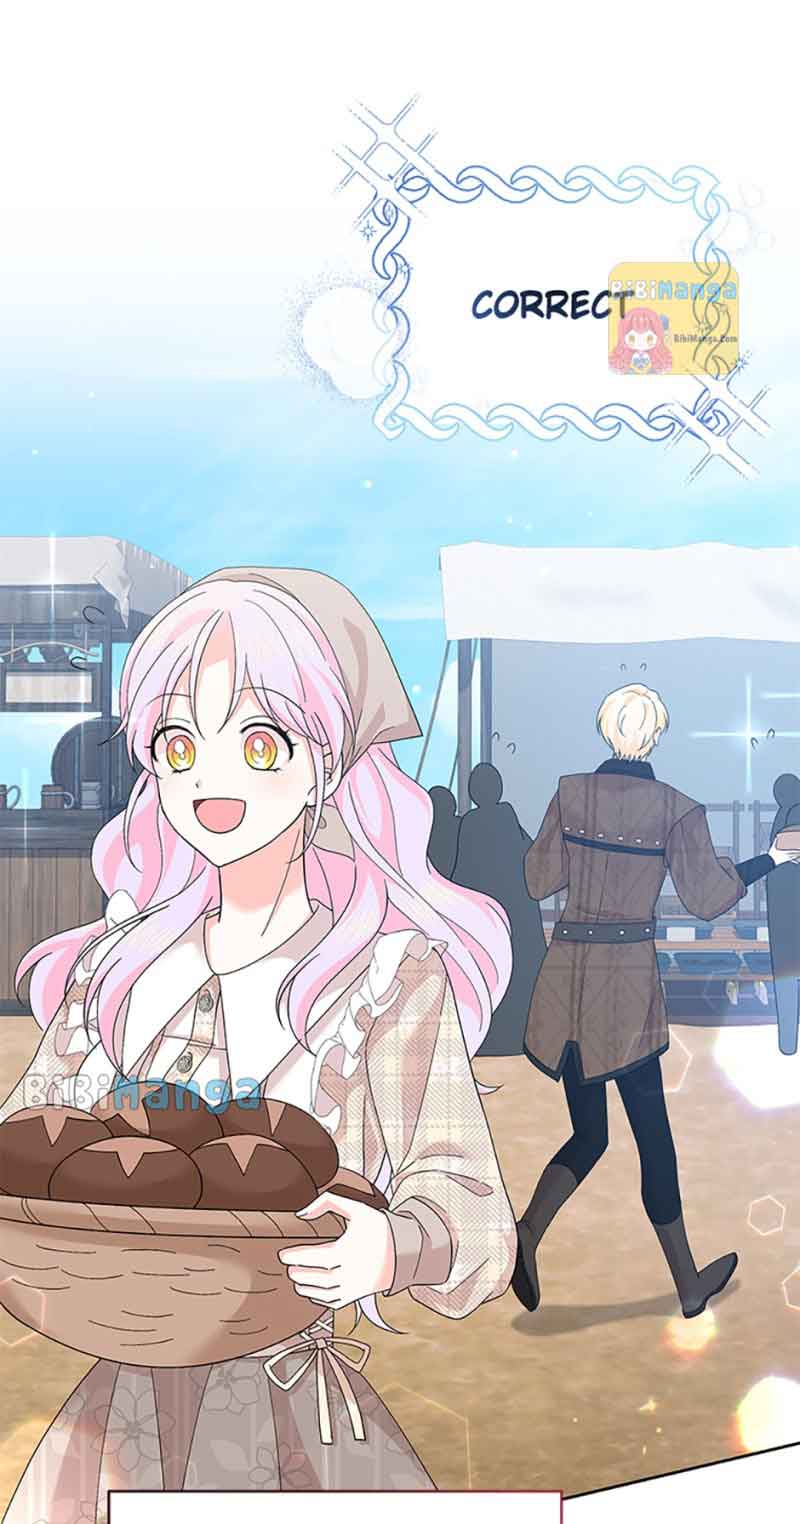 She came back and opened a dessert shop chapter 54